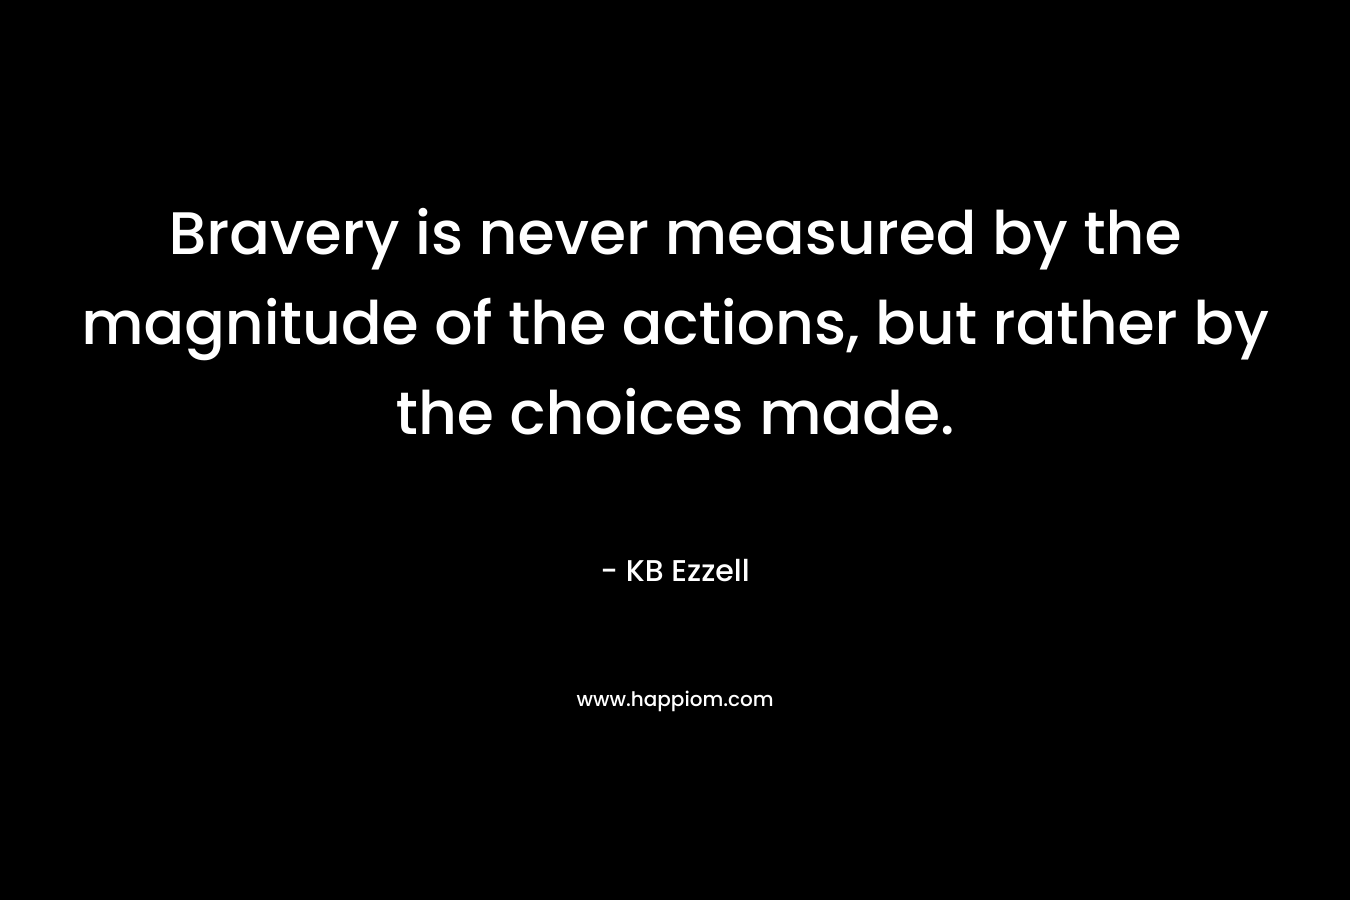 Bravery is never measured by the magnitude of the actions, but rather by the choices made. – KB Ezzell